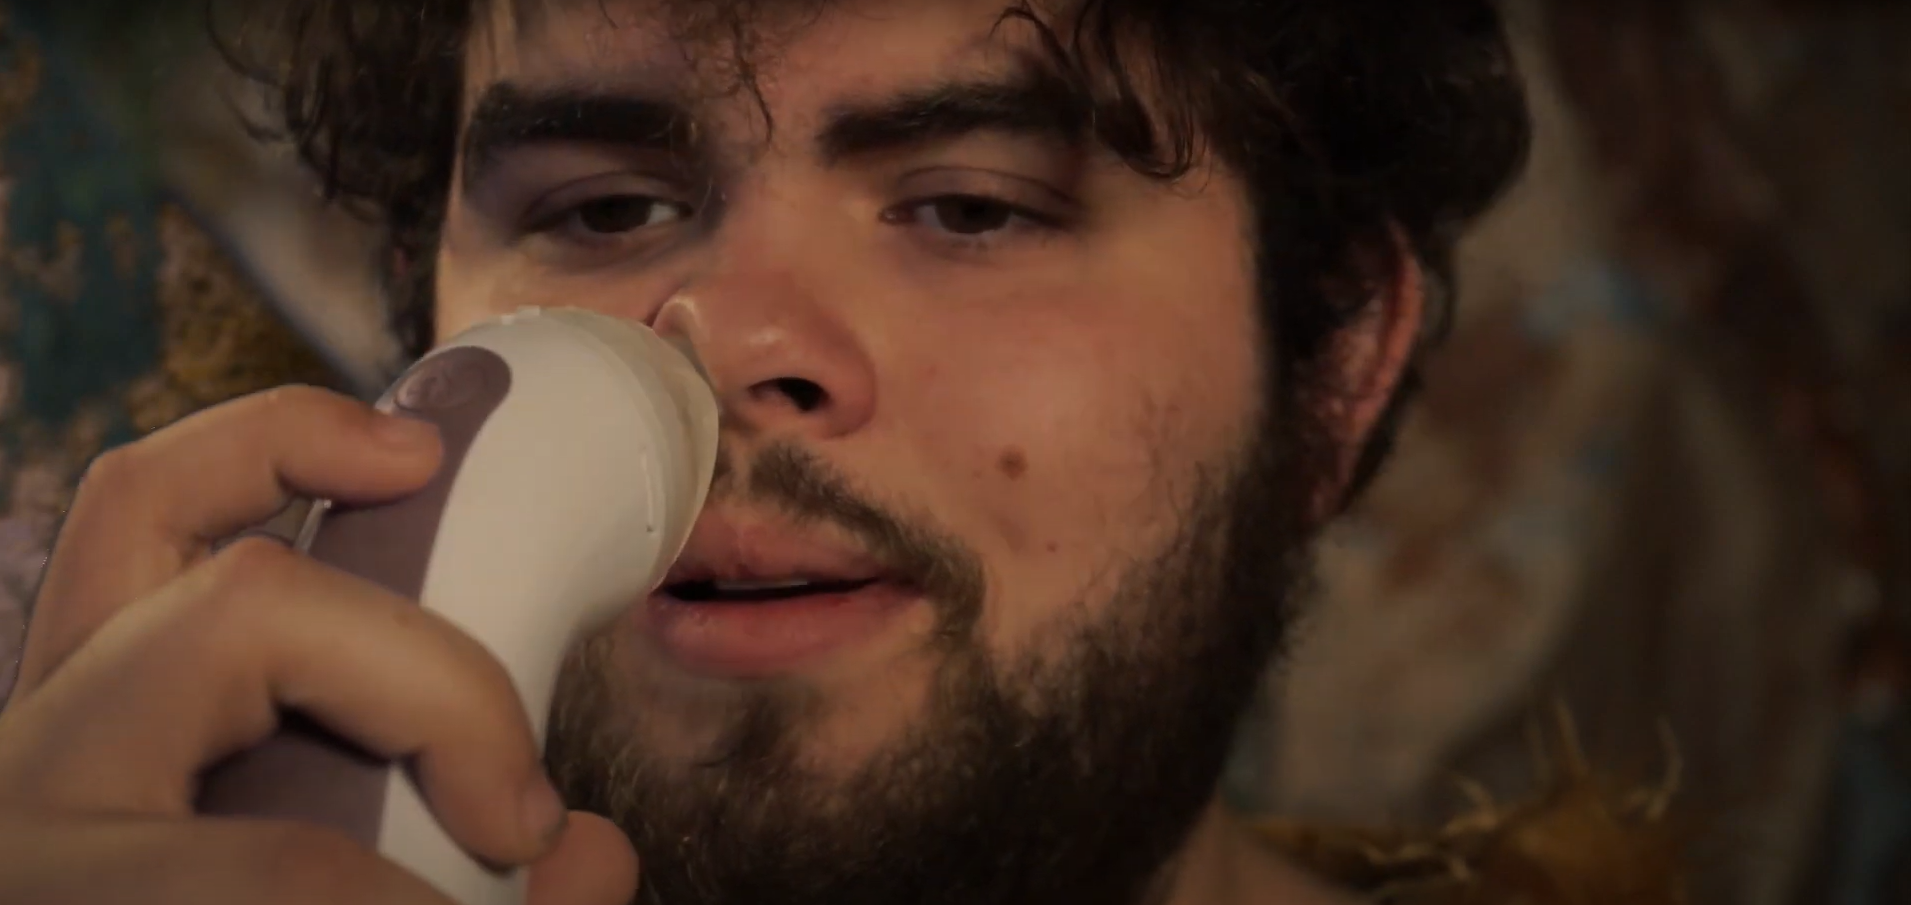 Load video: The CLEARinse Caveman video, demonstrating how easy it is to use the nasal cleaning system